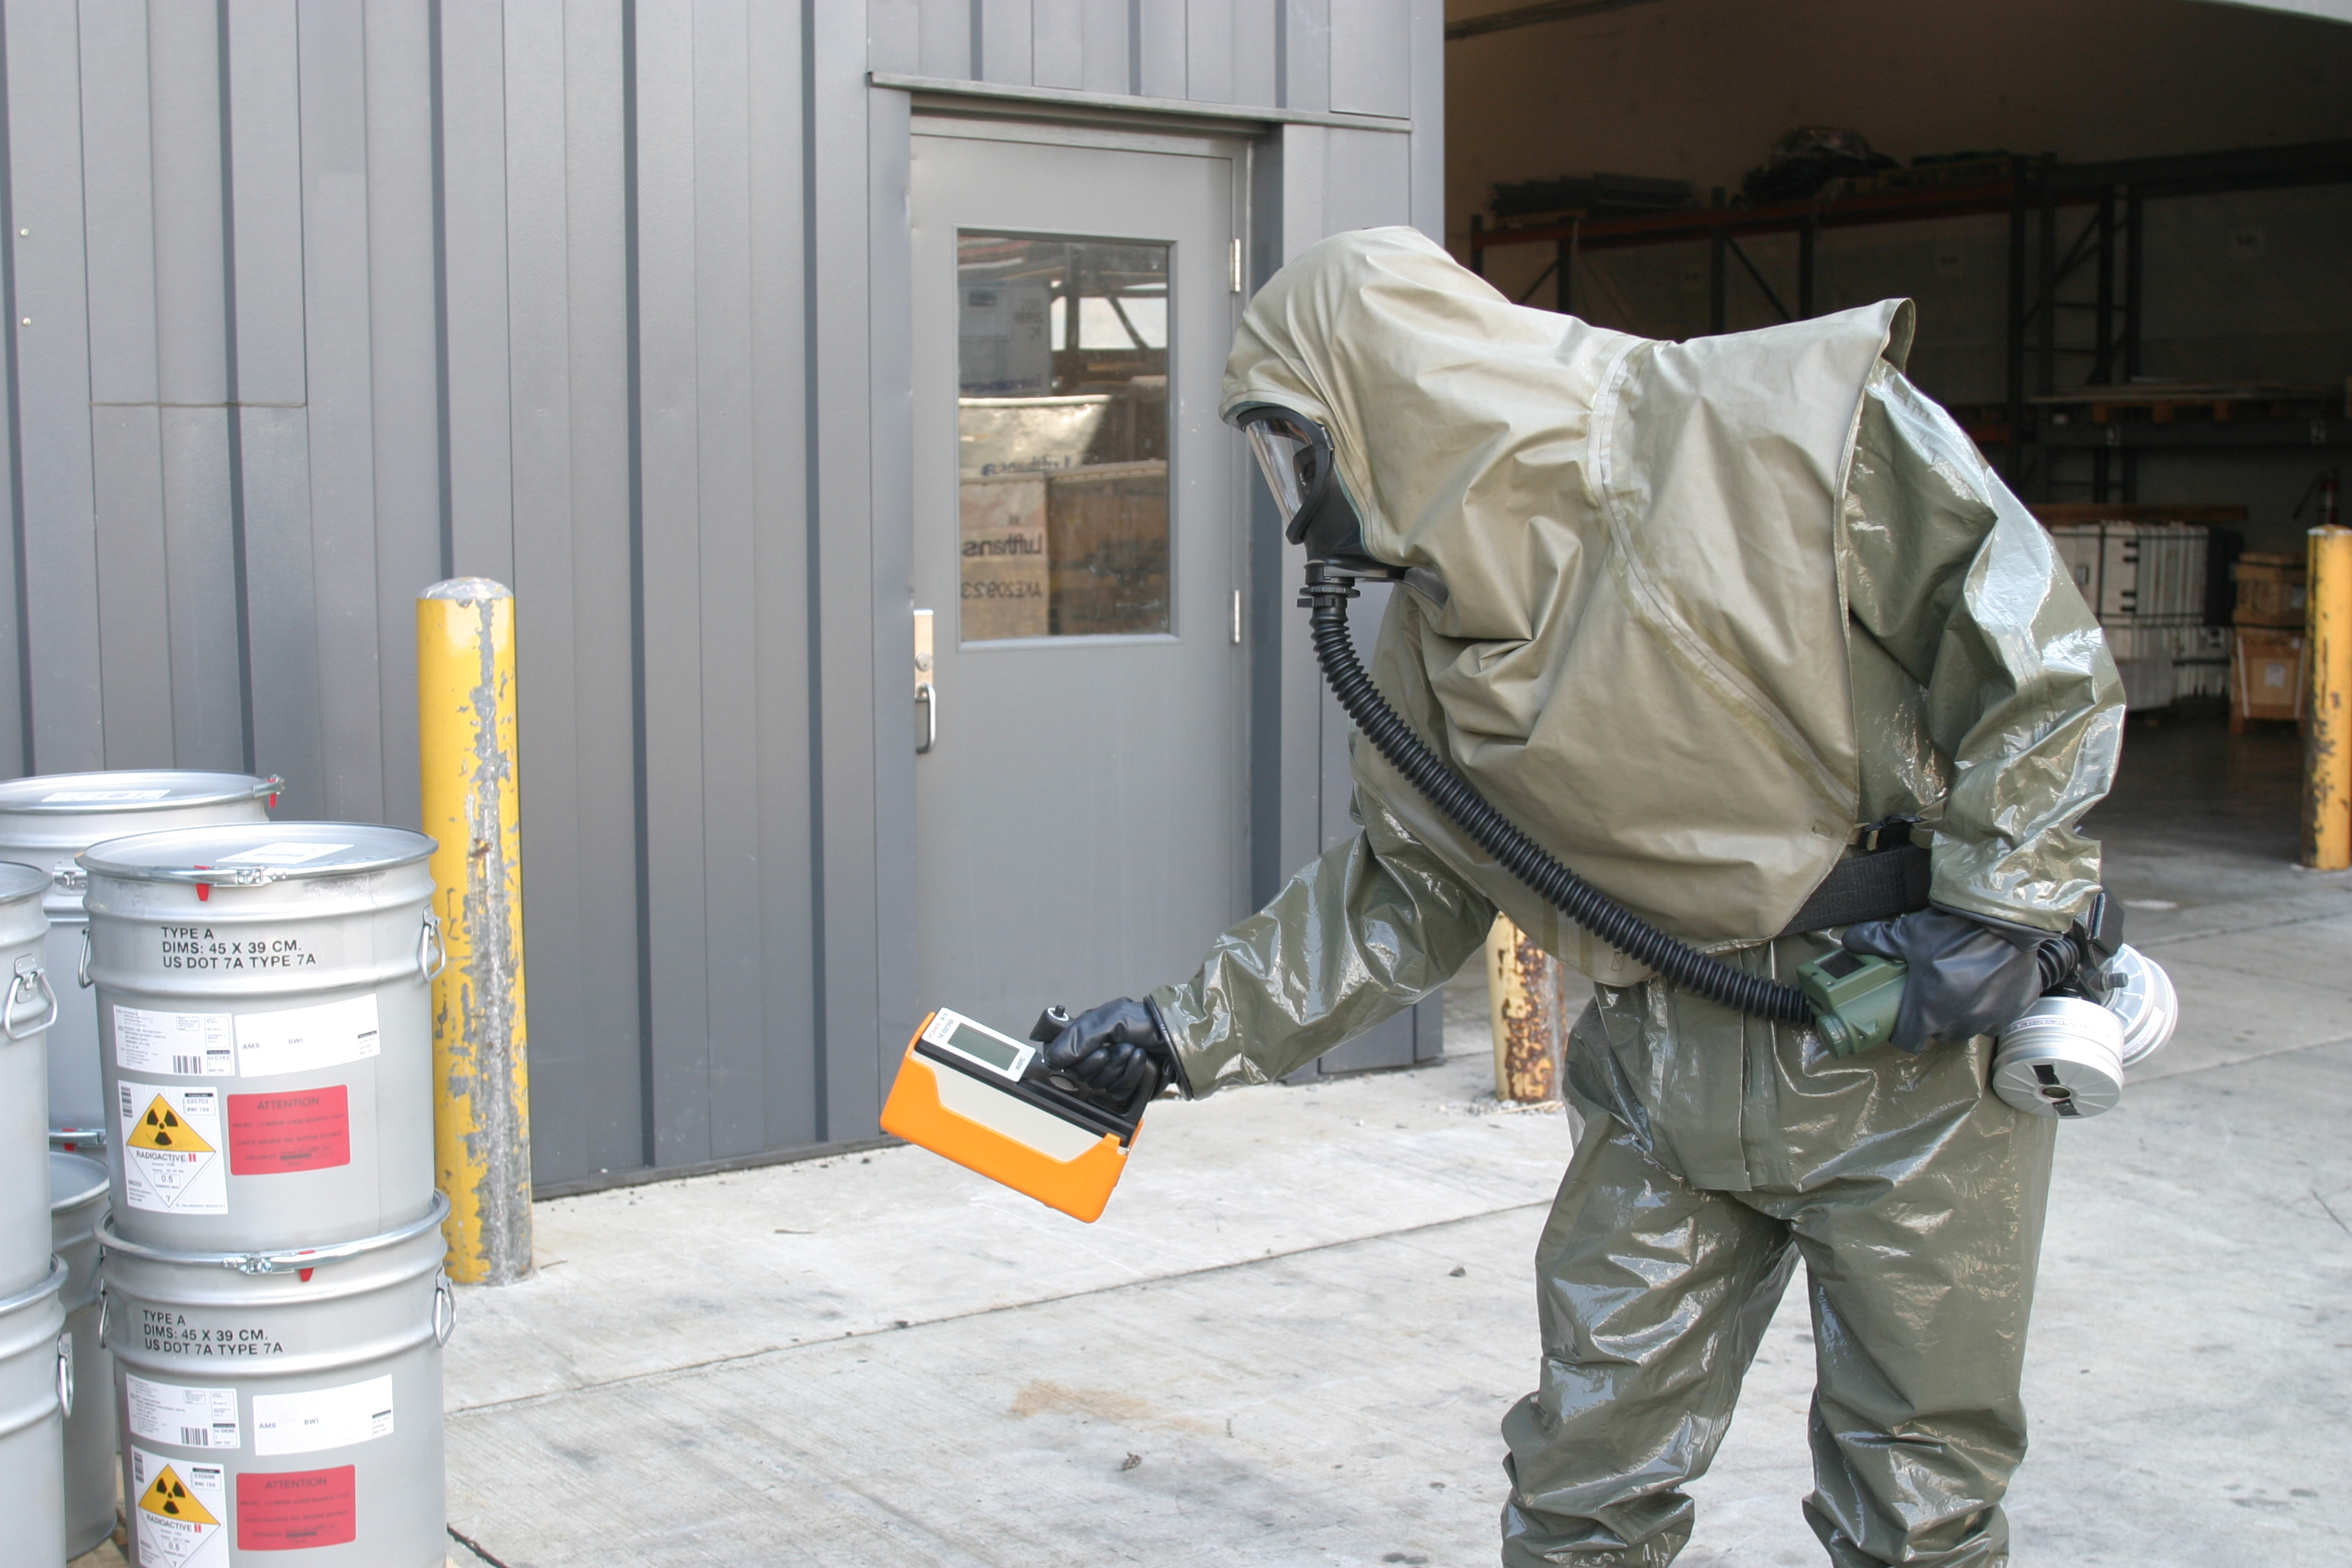 Customs and Border Protection has the capability to check and evaluate hazardous materials.